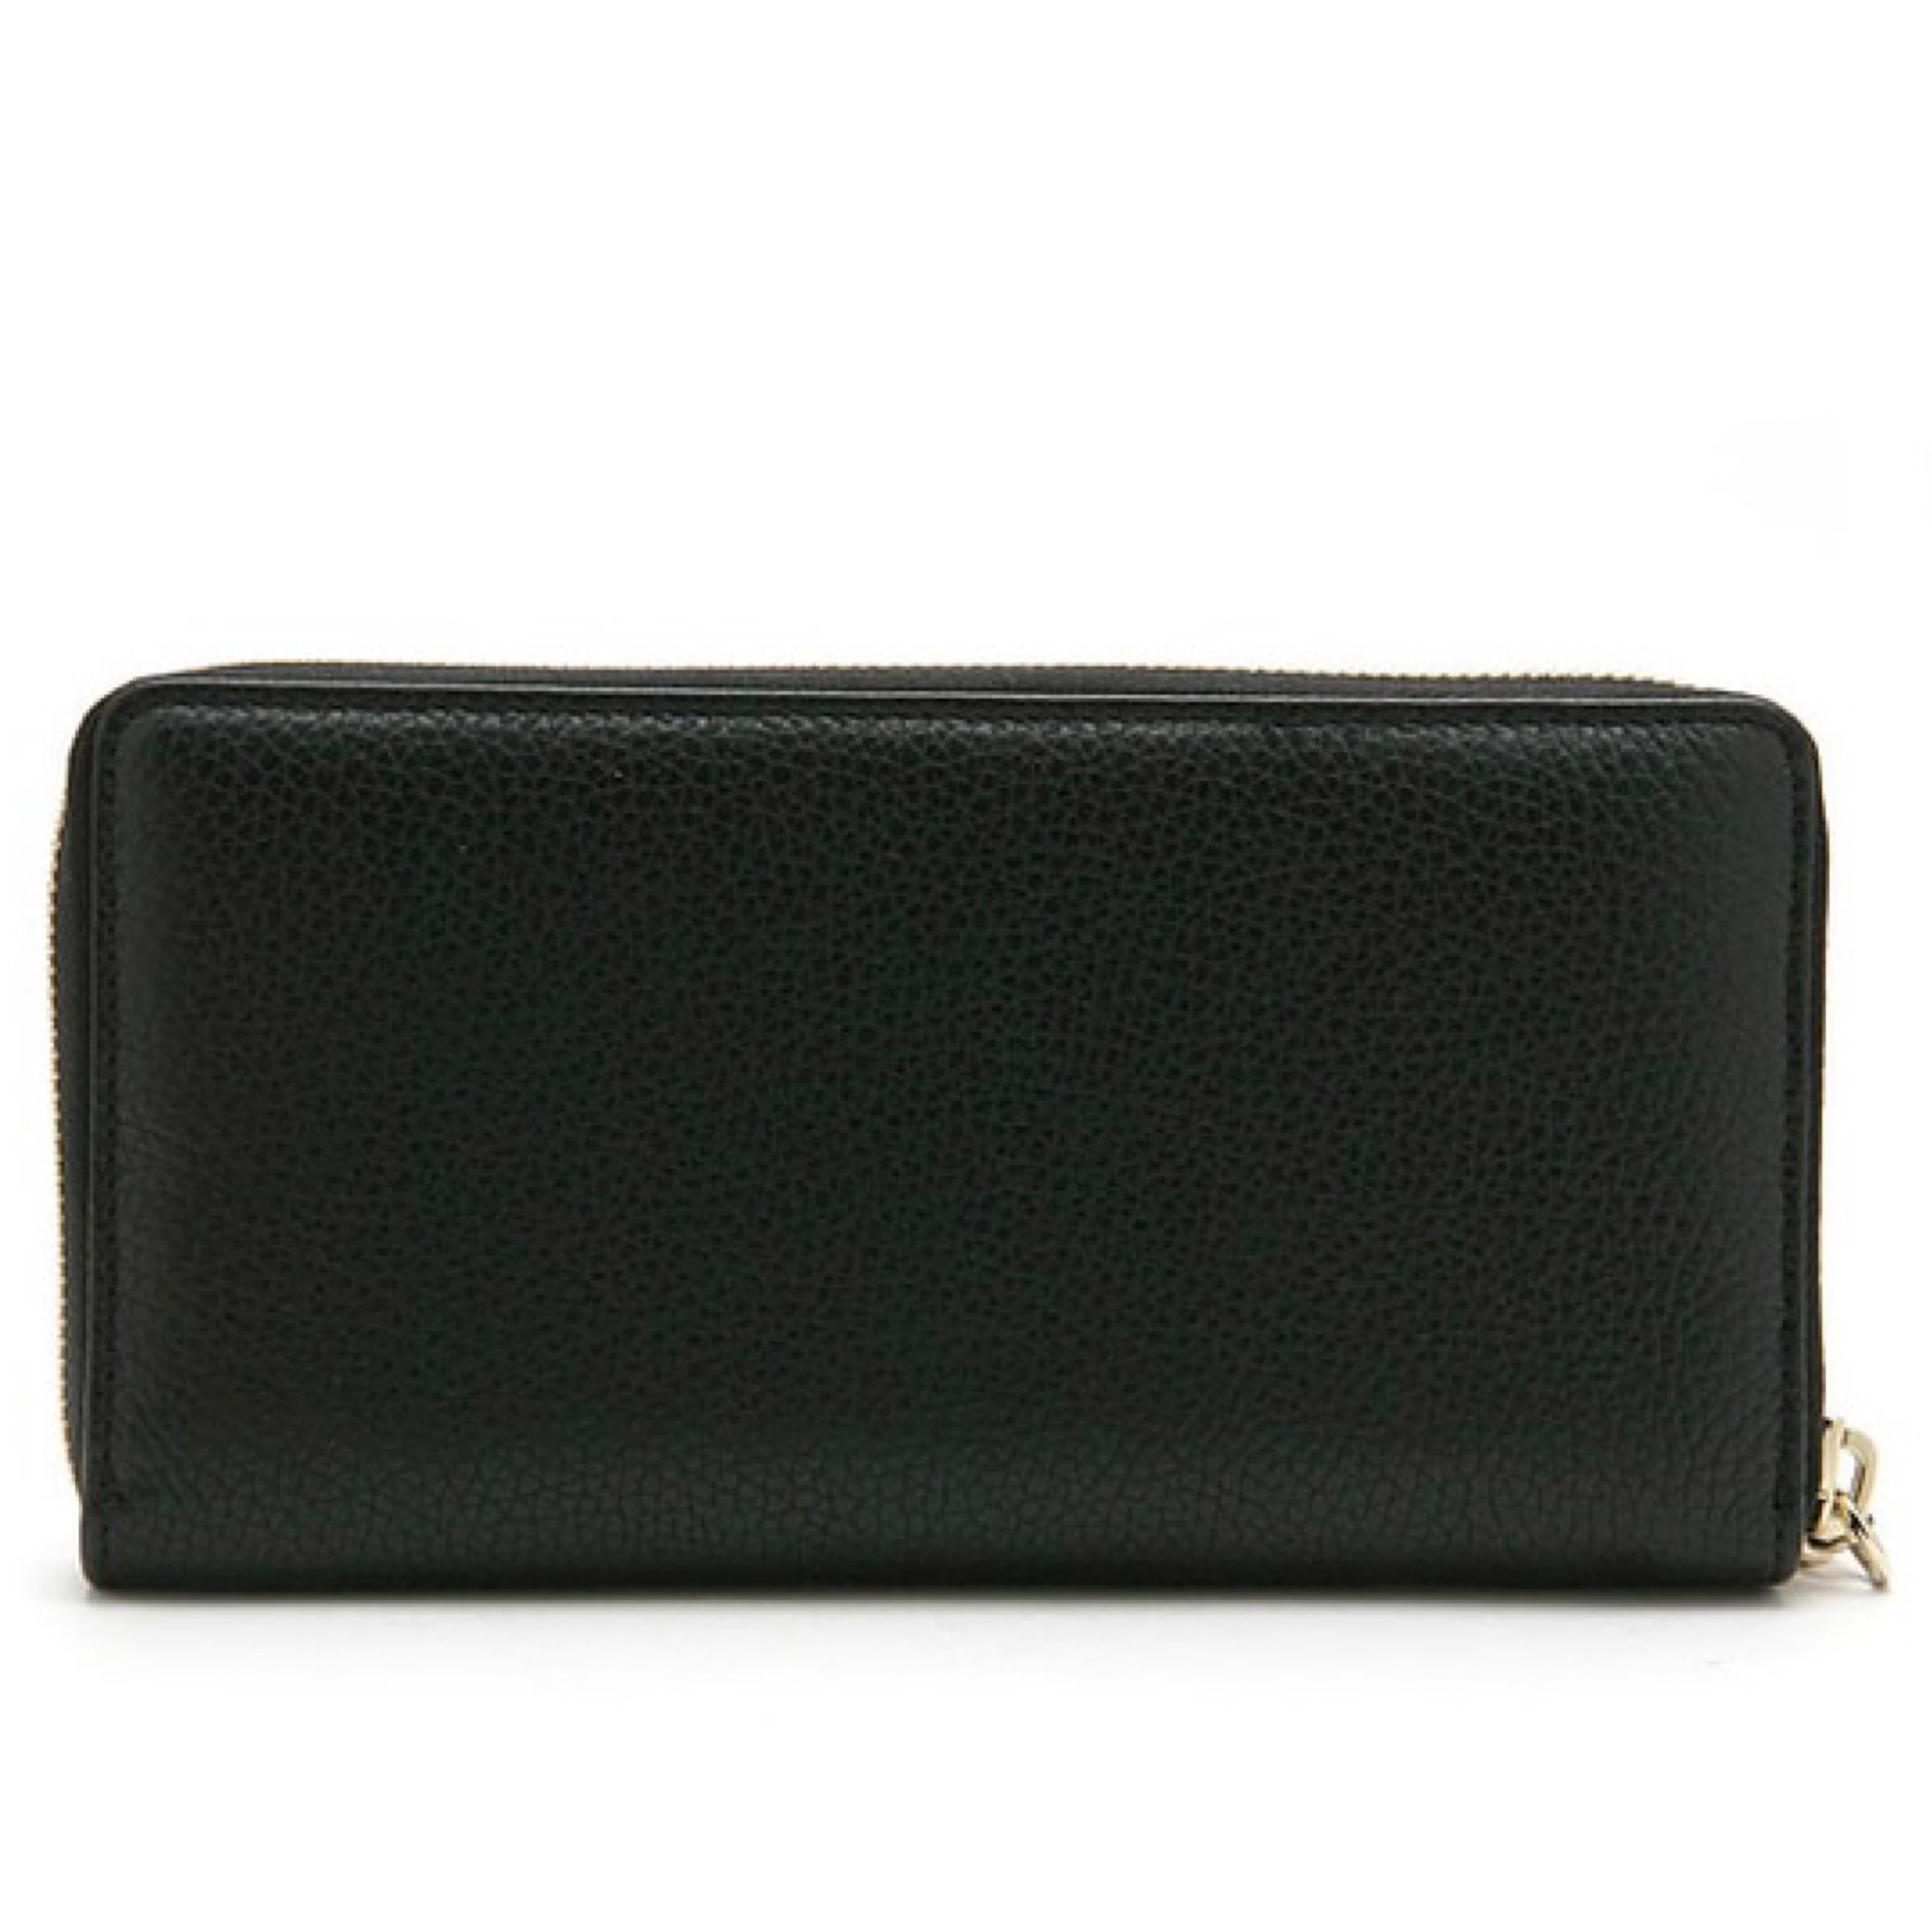 Women's NEW Gucci Soho Black Leather Zip Around Leather Long Wallet Clutch Bag For Sale